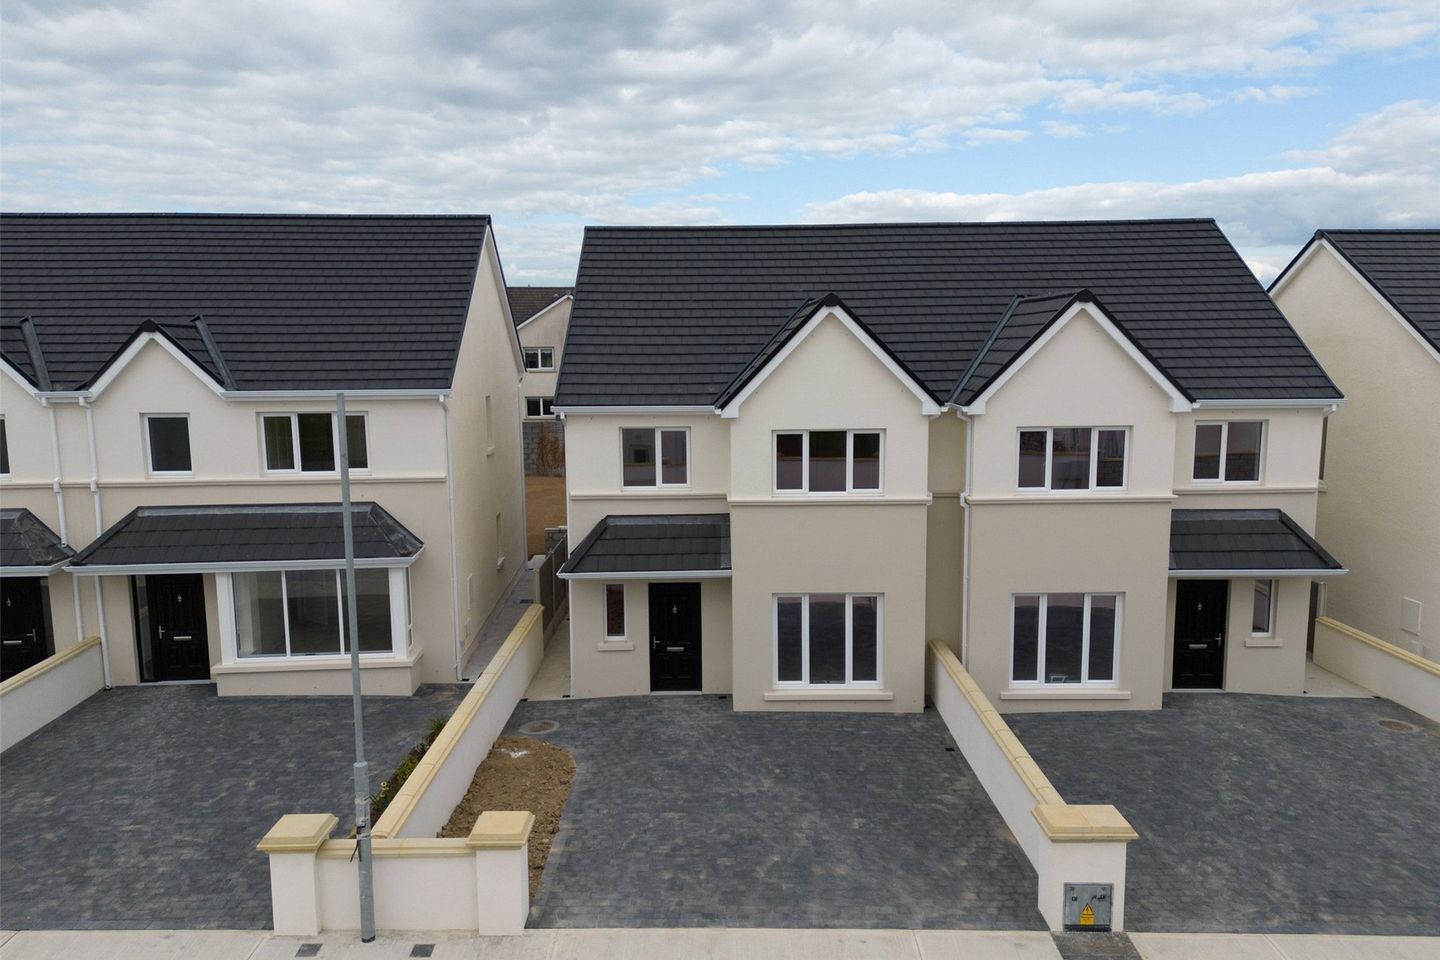 Four Bed Semi-Detached, Clonmore, Four Bed Semi-Detached, Clonmore, Ballyviniter, Mallow, Co. Cork